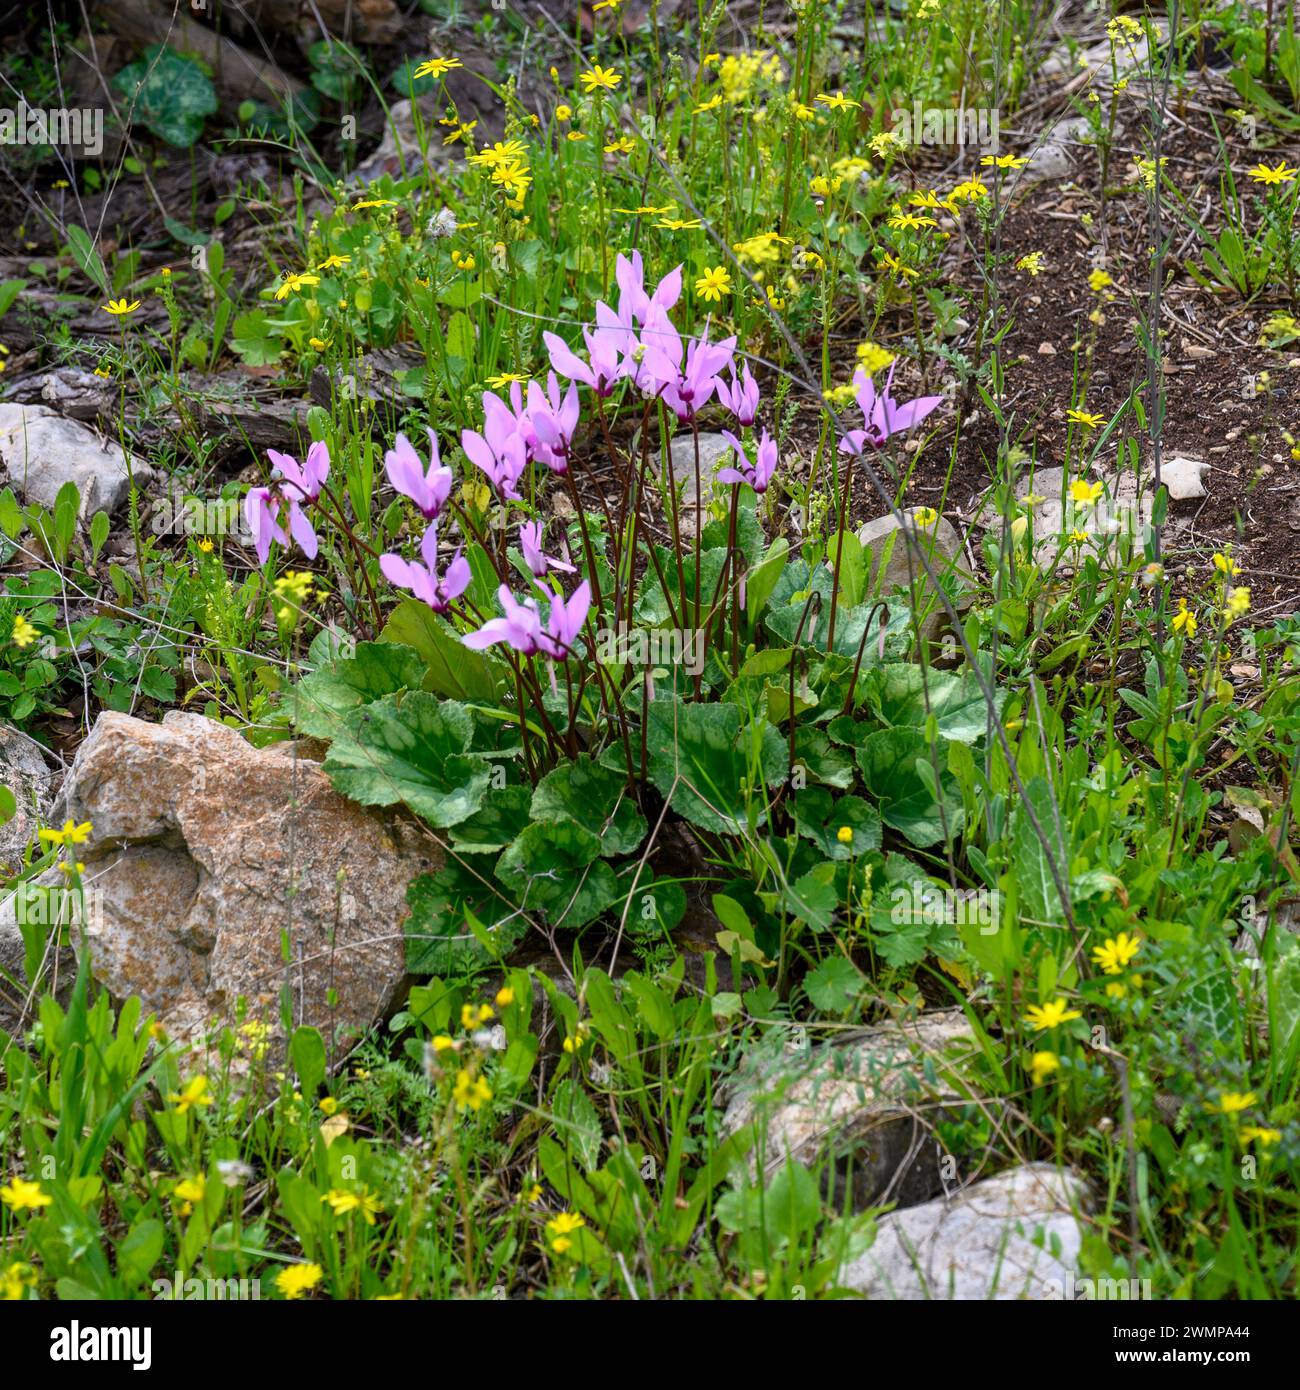 A cluster of Flowering Persian Violets (Cyclamen persicum). الراعي, Photographed in the pine tree forest in Israel Stock Photo